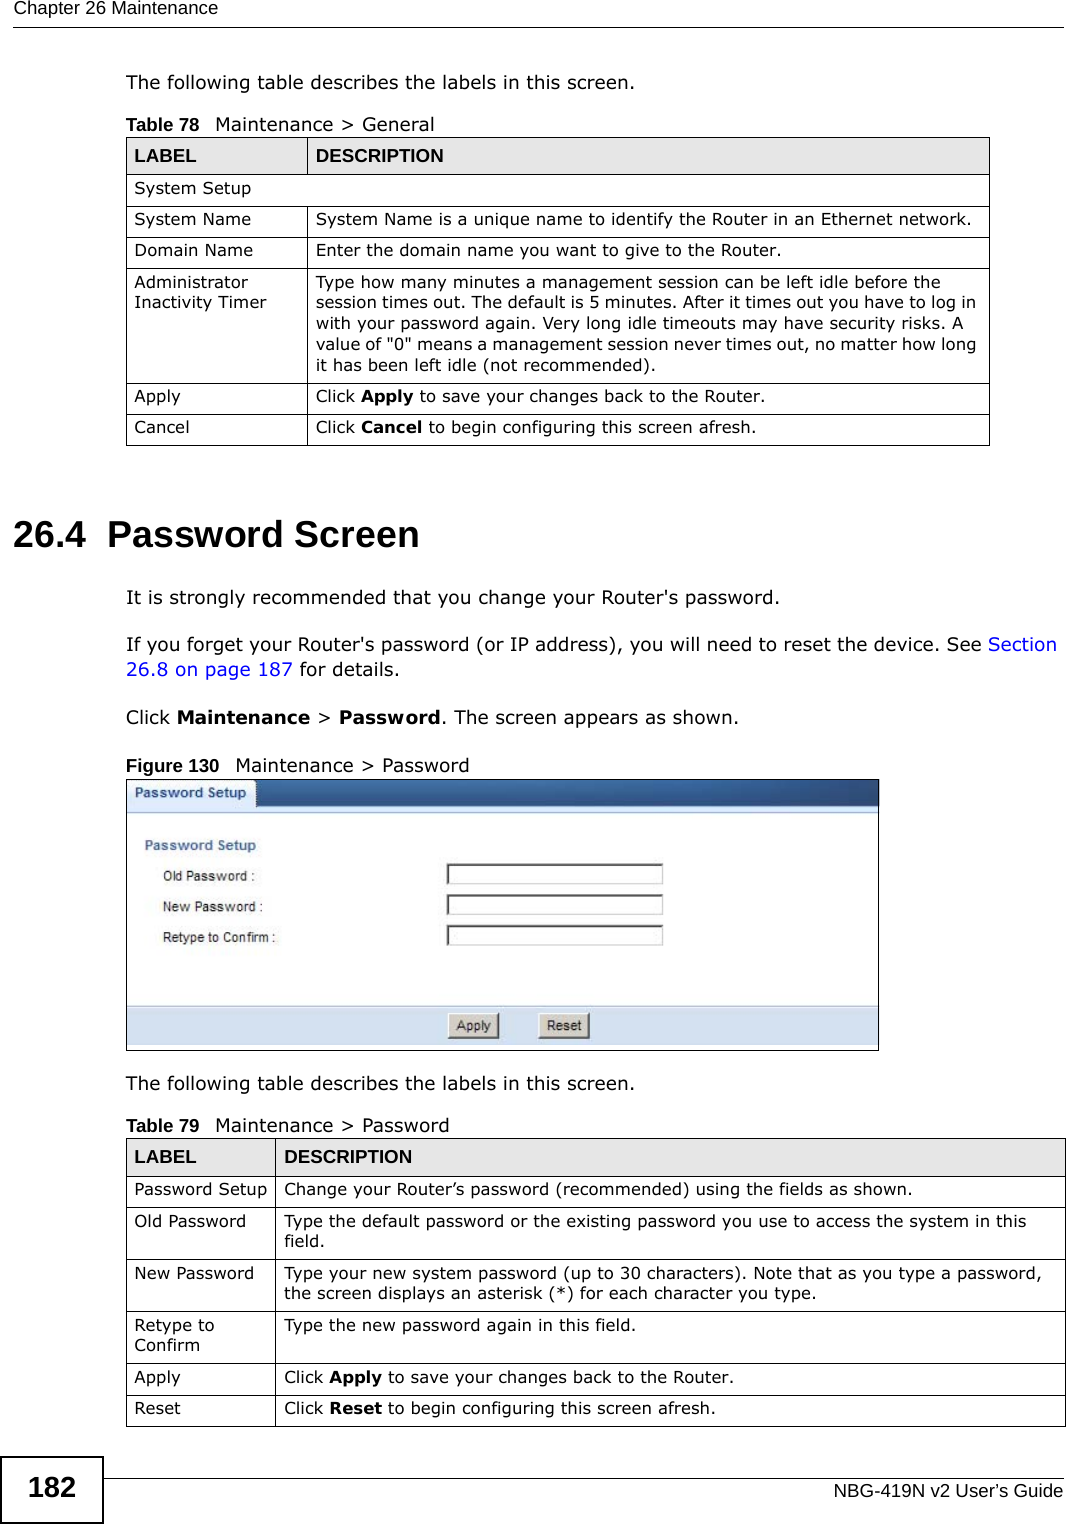 Chapter 26 MaintenanceNBG-419N v2 User’s Guide182The following table describes the labels in this screen.26.4  Password ScreenIt is strongly recommended that you change your Router&apos;s password. If you forget your Router&apos;s password (or IP address), you will need to reset the device. See Section 26.8 on page 187 for details.Click Maintenance &gt; Password. The screen appears as shown.Figure 130   Maintenance &gt; Password The following table describes the labels in this screen.Table 78   Maintenance &gt; GeneralLABEL DESCRIPTIONSystem SetupSystem Name System Name is a unique name to identify the Router in an Ethernet network.Domain Name Enter the domain name you want to give to the Router.Administrator Inactivity TimerType how many minutes a management session can be left idle before the session times out. The default is 5 minutes. After it times out you have to log in with your password again. Very long idle timeouts may have security risks. A value of &quot;0&quot; means a management session never times out, no matter how long it has been left idle (not recommended).Apply Click Apply to save your changes back to the Router.Cancel Click Cancel to begin configuring this screen afresh.Table 79   Maintenance &gt; PasswordLABEL DESCRIPTIONPassword Setup Change your Router’s password (recommended) using the fields as shown.Old Password Type the default password or the existing password you use to access the system in this field.New Password Type your new system password (up to 30 characters). Note that as you type a password, the screen displays an asterisk (*) for each character you type.Retype to ConfirmType the new password again in this field.Apply Click Apply to save your changes back to the Router.Reset Click Reset to begin configuring this screen afresh.